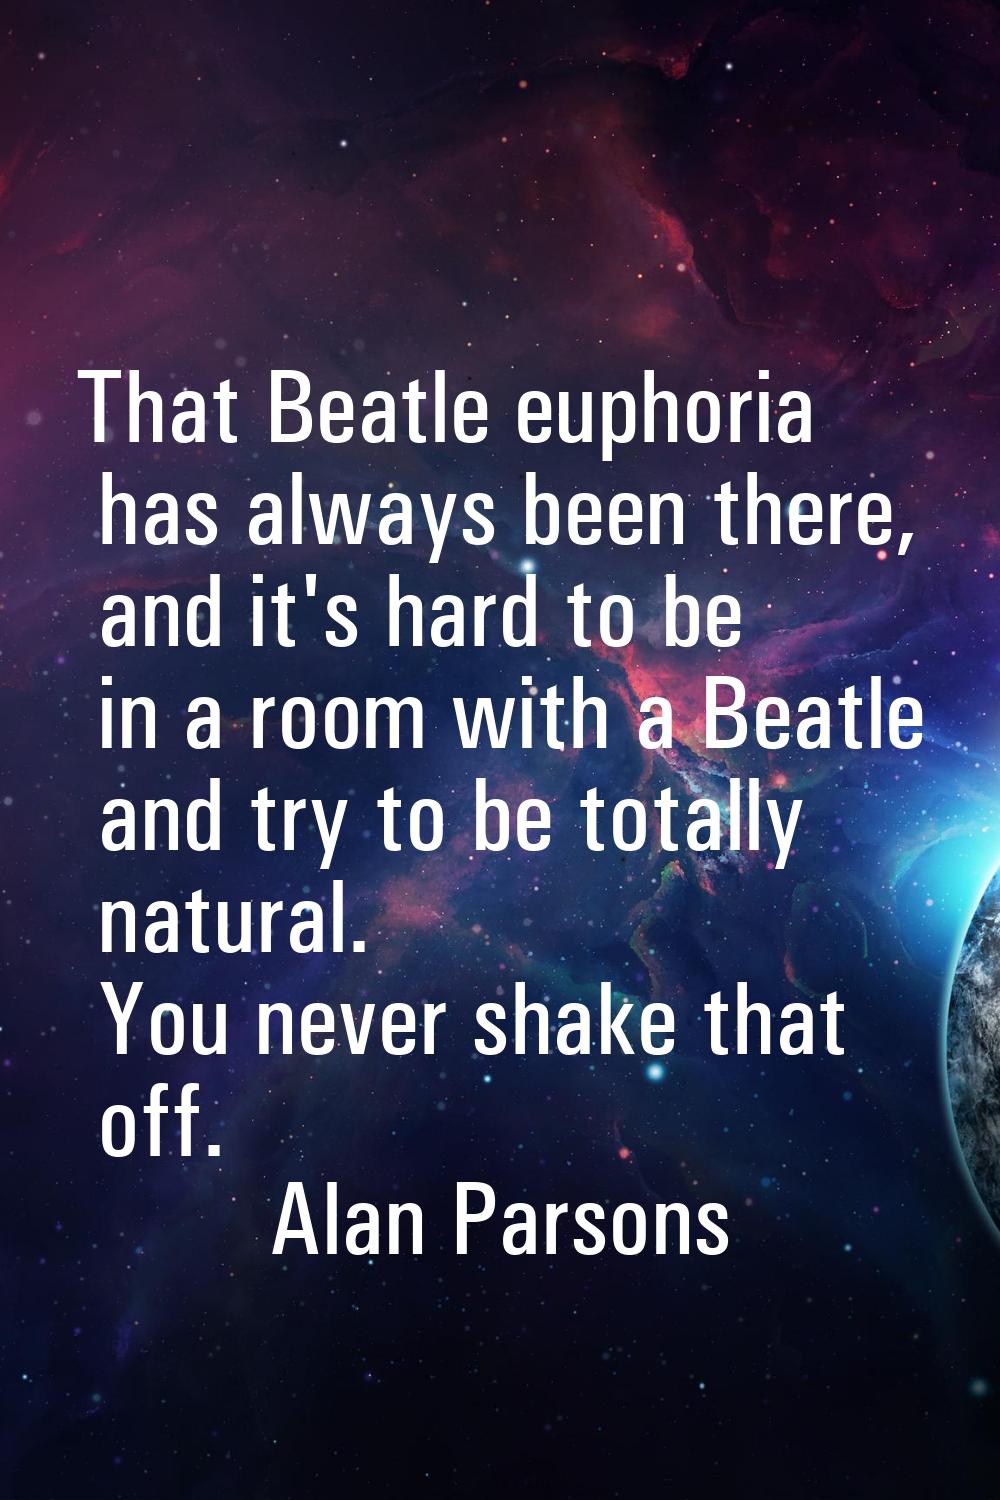 That Beatle euphoria has always been there, and it's hard to be in a room with a Beatle and try to 